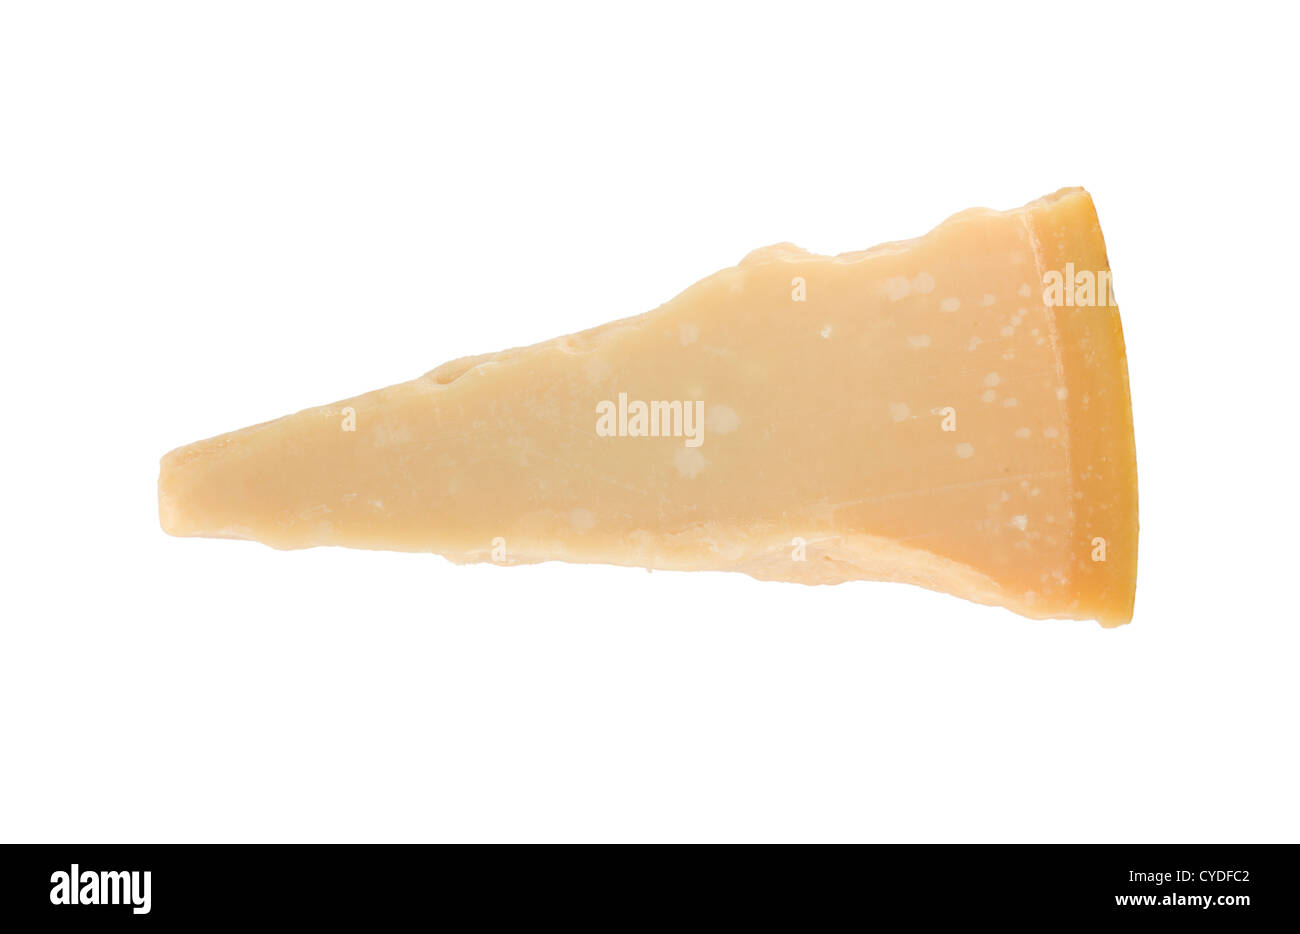 Parmesan cheese. View from above. Isolated on white background Stock Photo